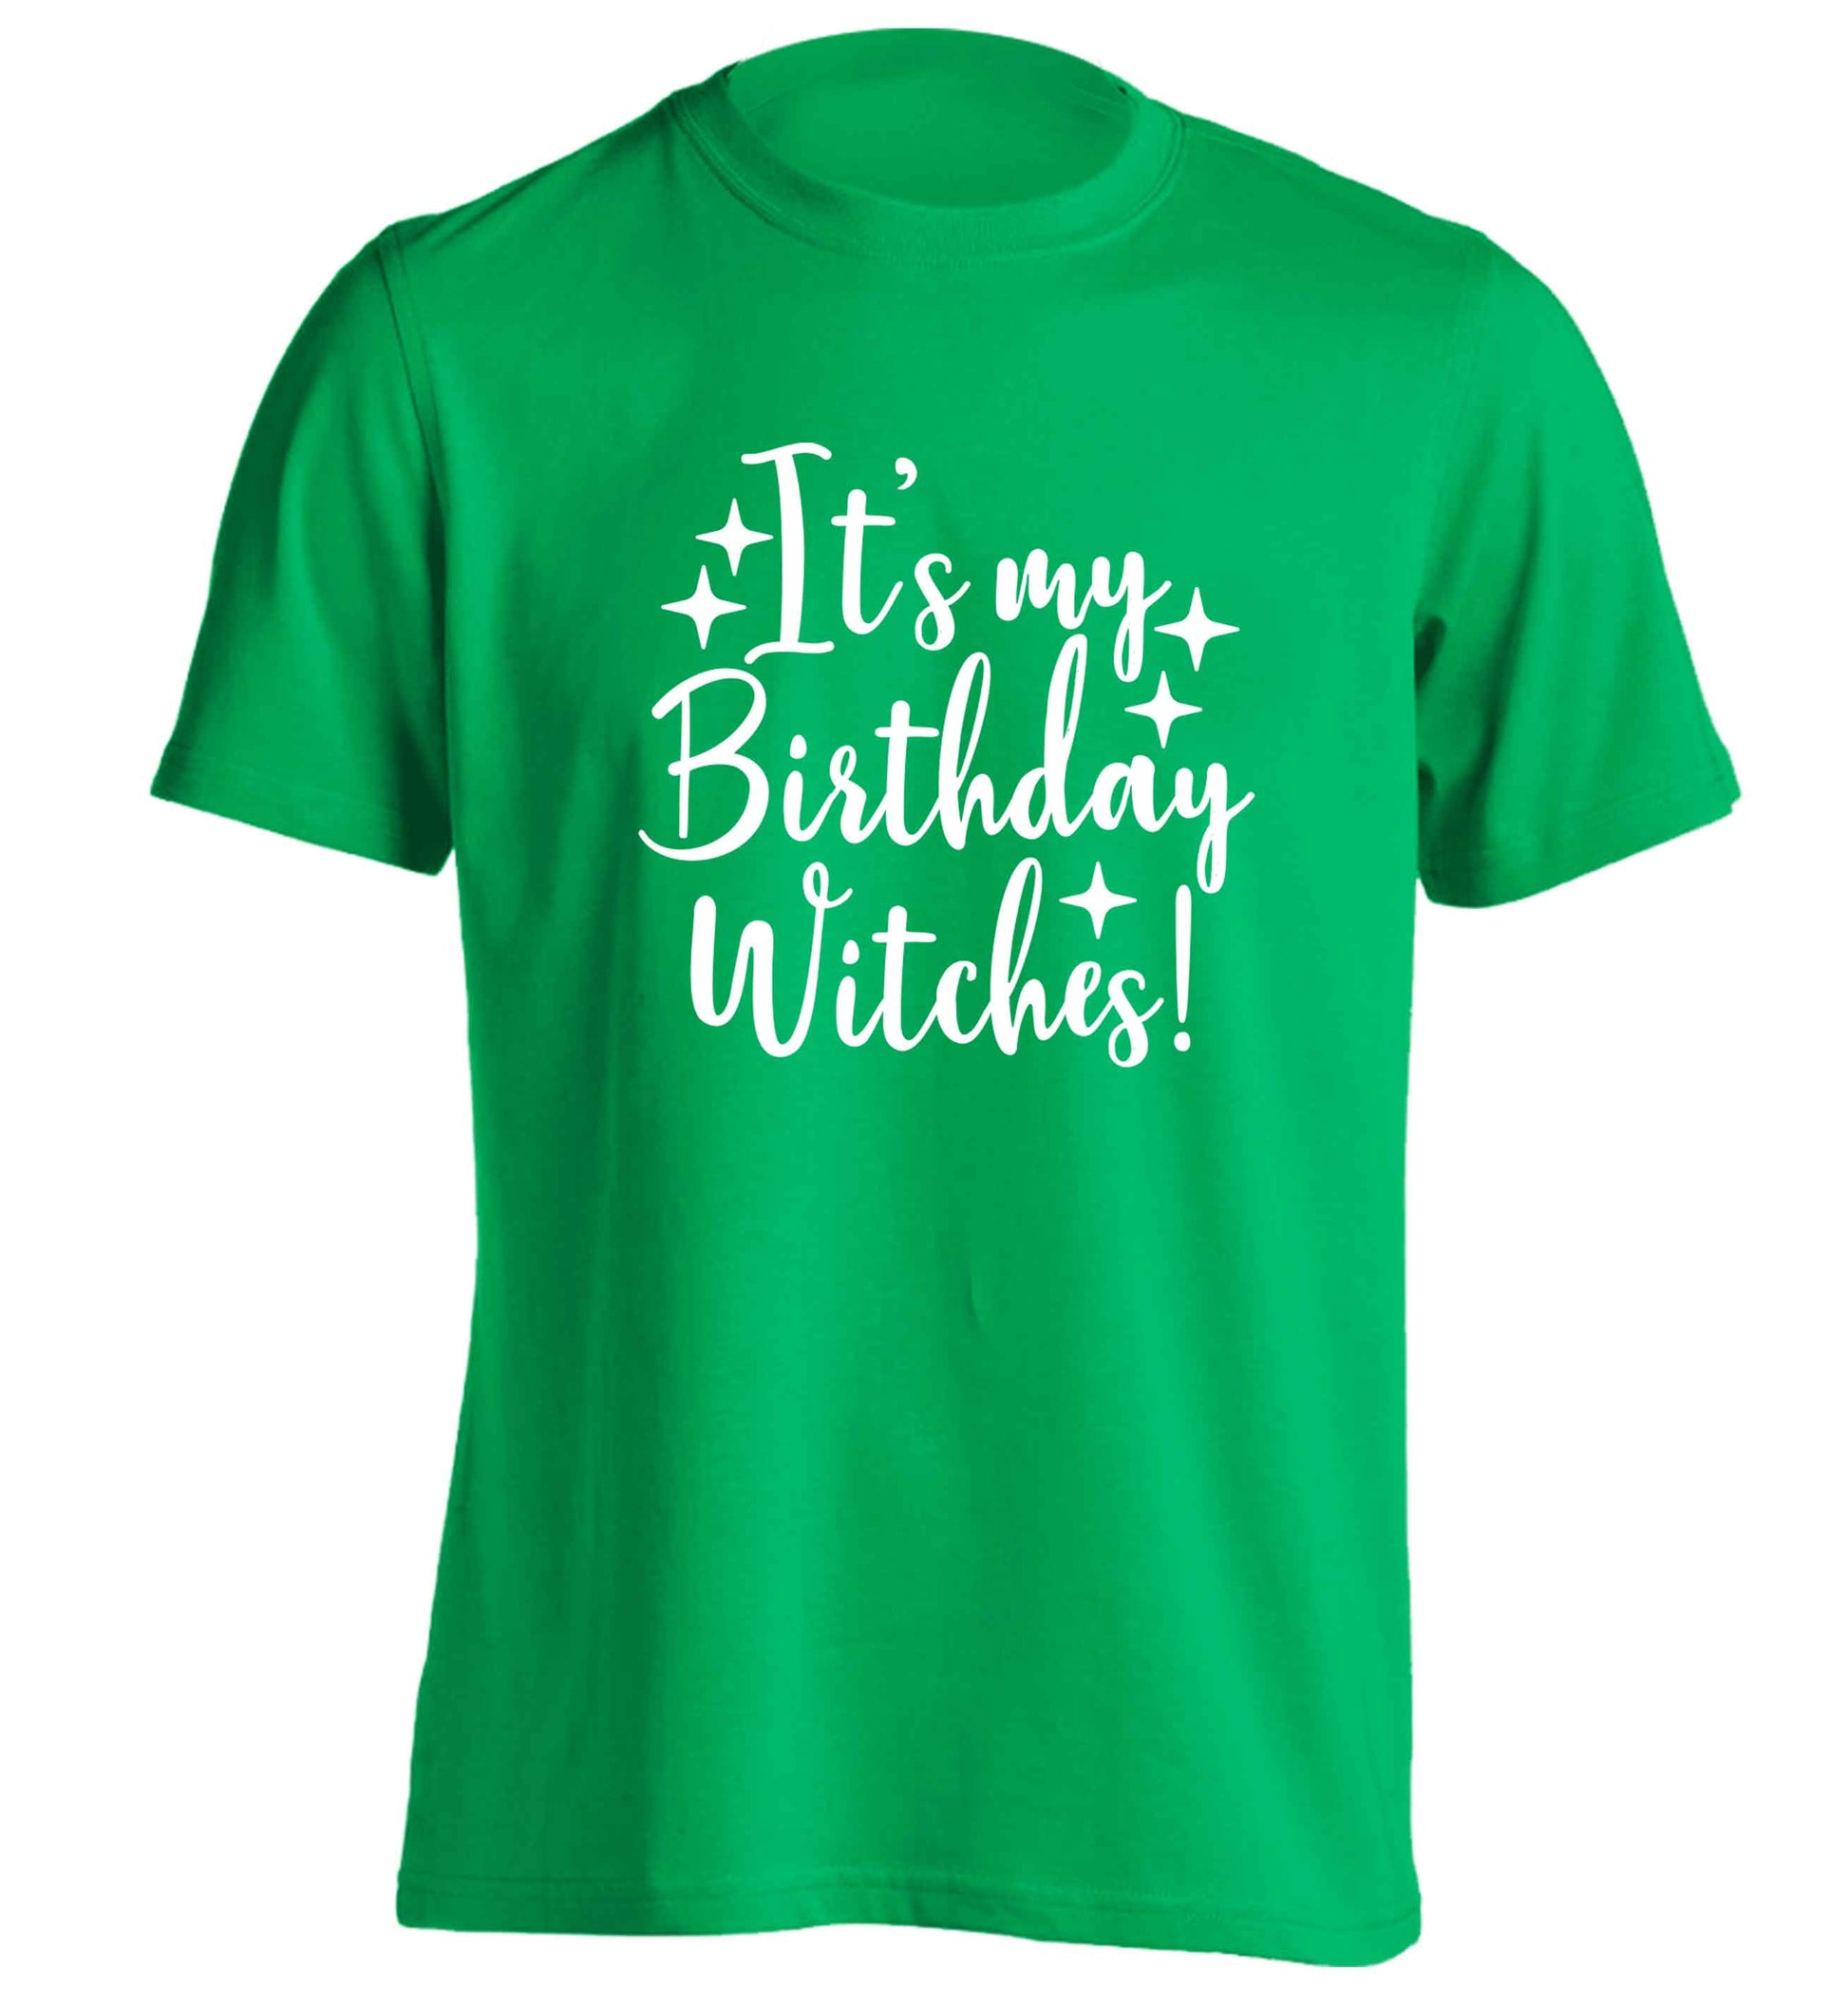 It's my birthday witches!adults unisex green Tshirt 2XL